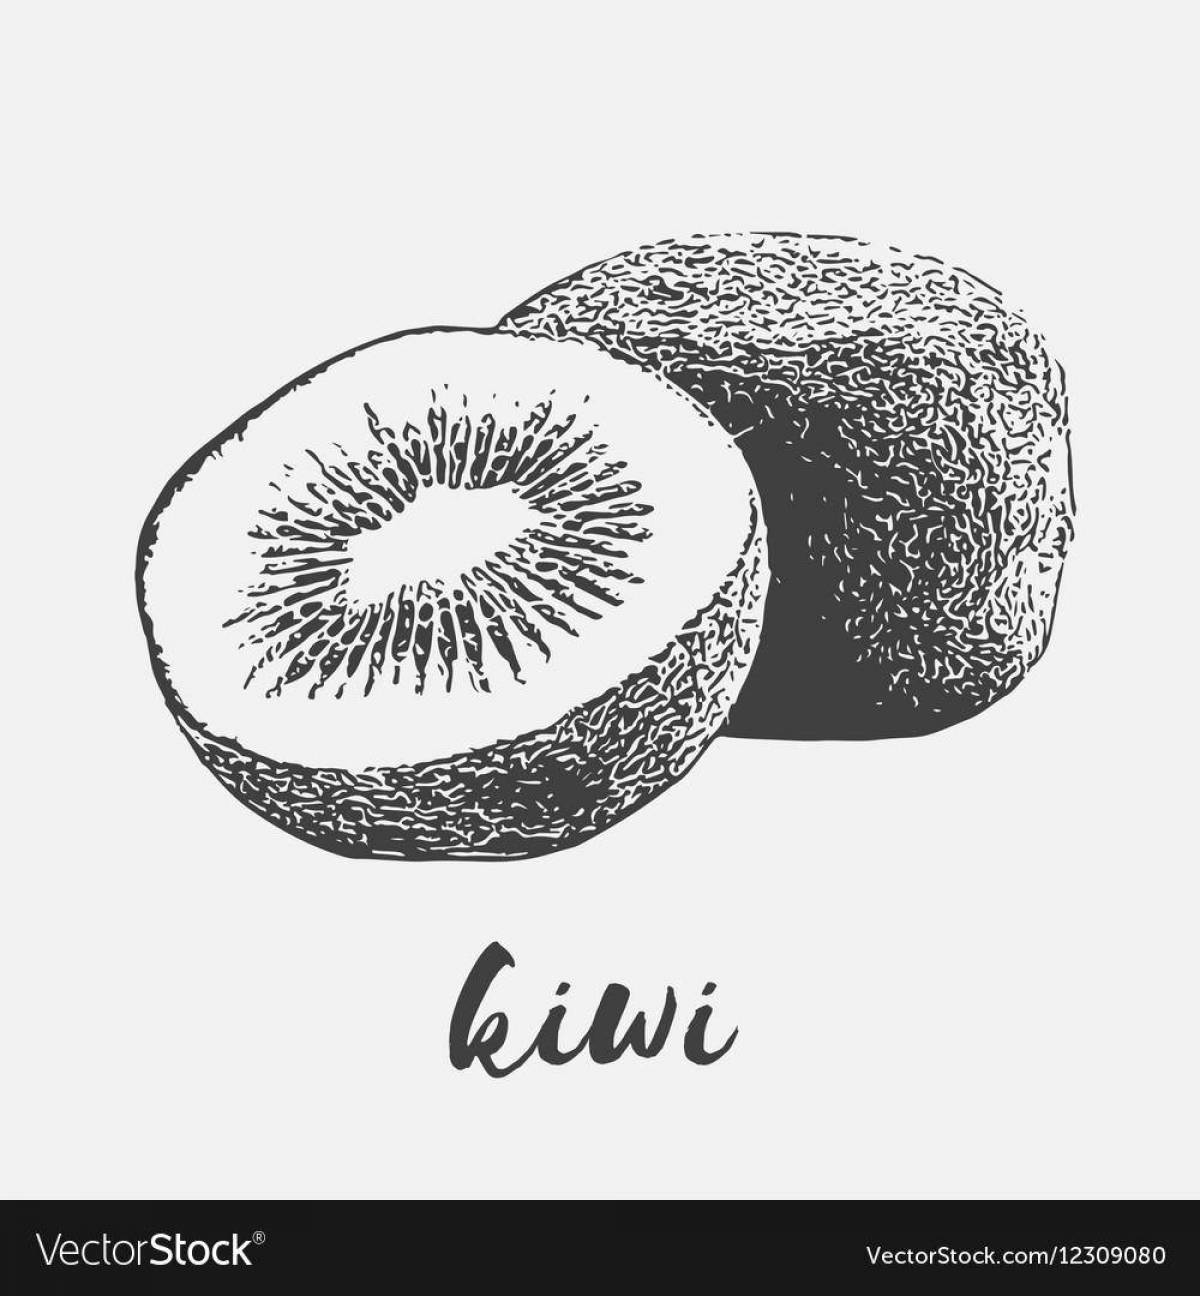 Coloring book bold kiwi willy